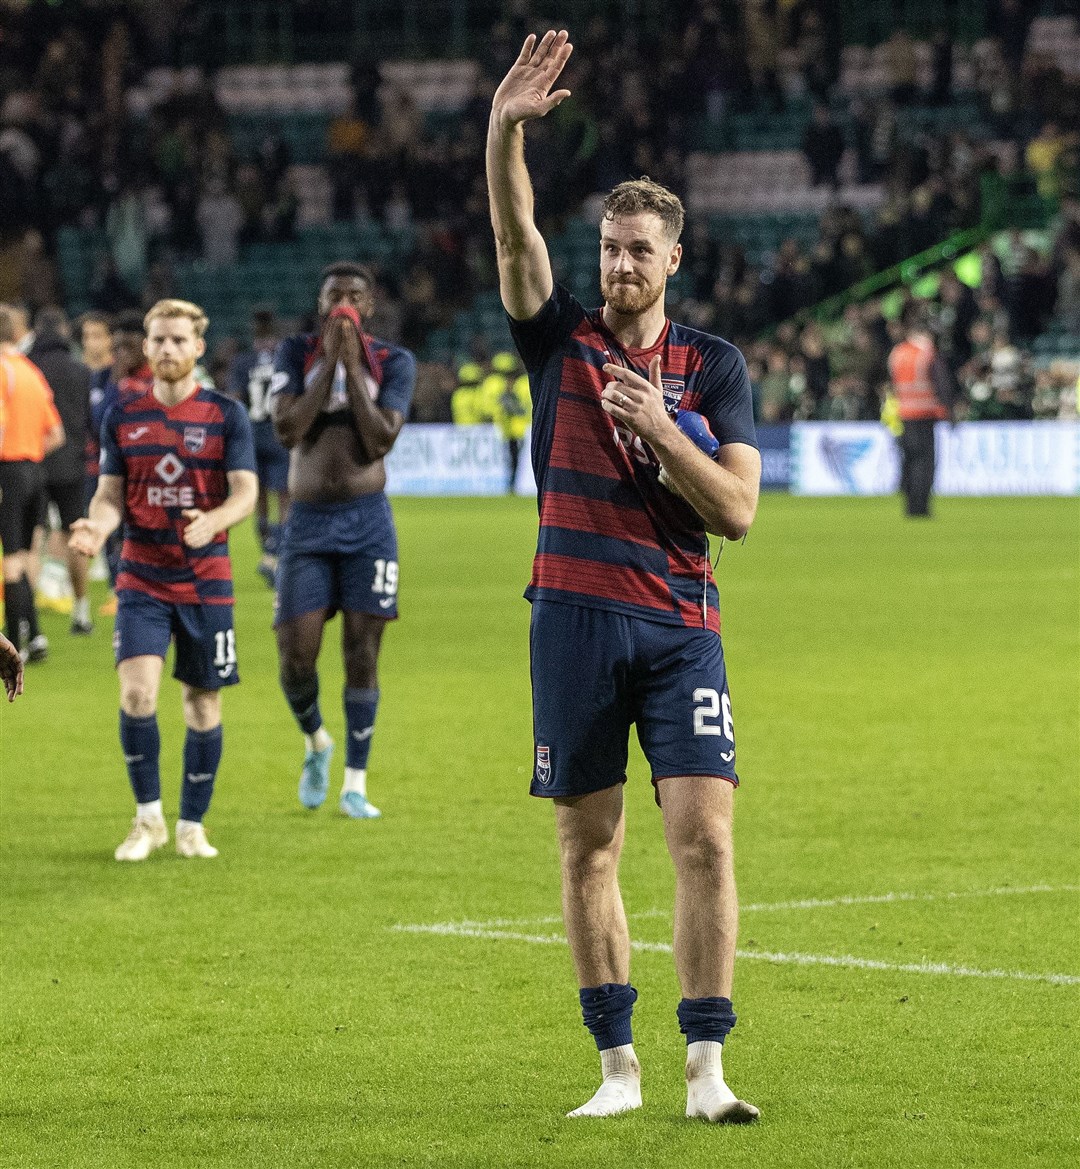 Picture - Ken Macpherson. Celtic(2) v Ross County(1) 12.11.22. Ross County's Jordan White applauds fans at the end.